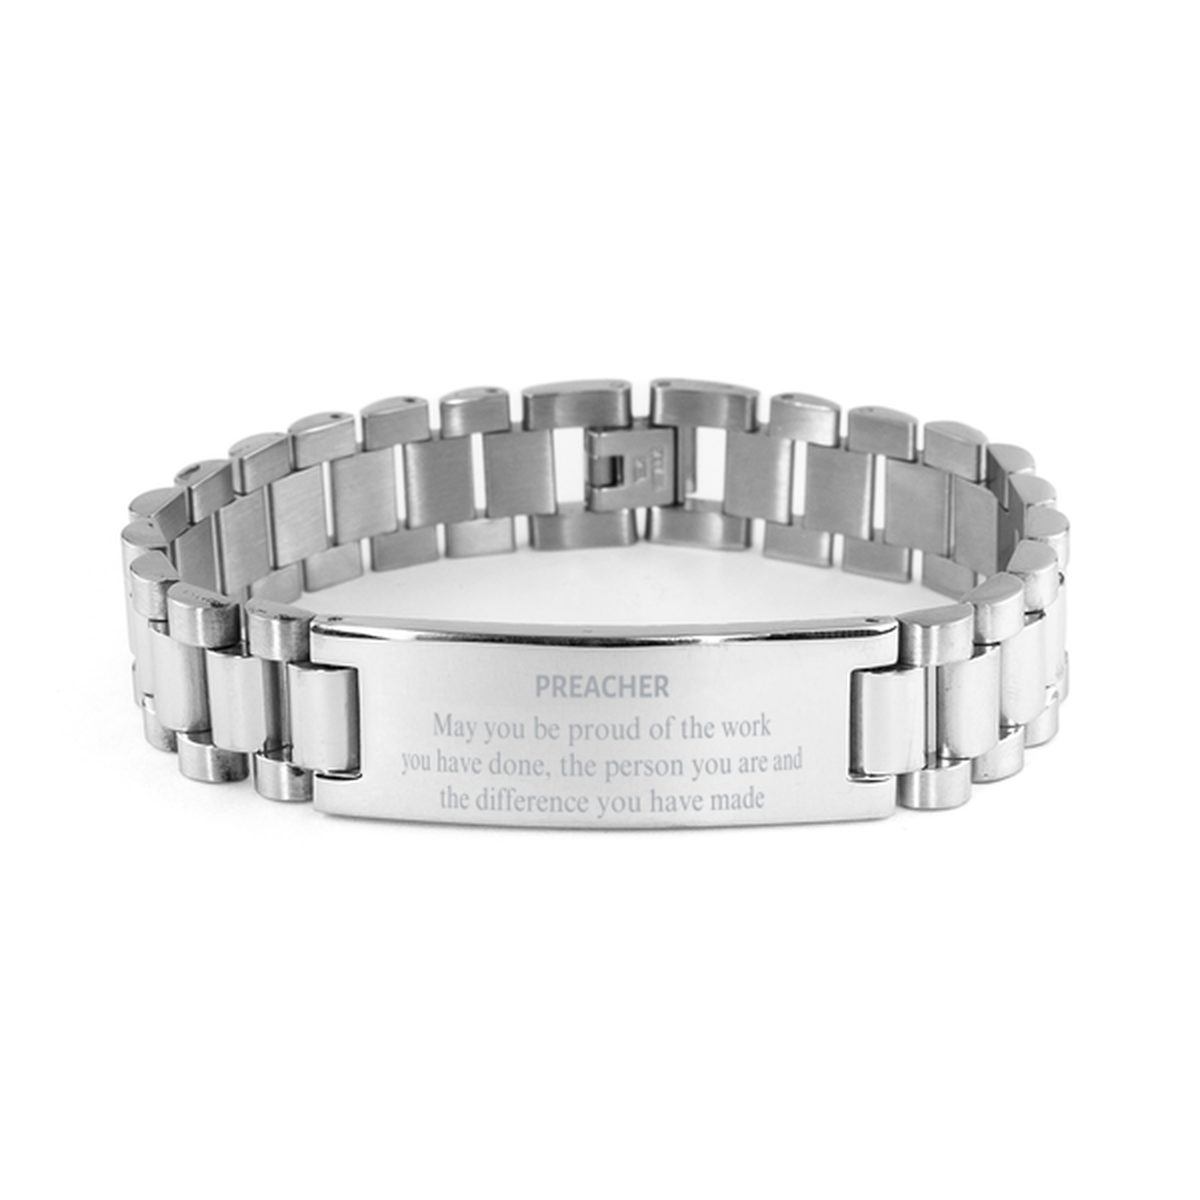 Preacher May you be proud of the work you have done, Retirement Preacher Ladder Stainless Steel Bracelet for Colleague Appreciation Gifts Amazing for Preacher